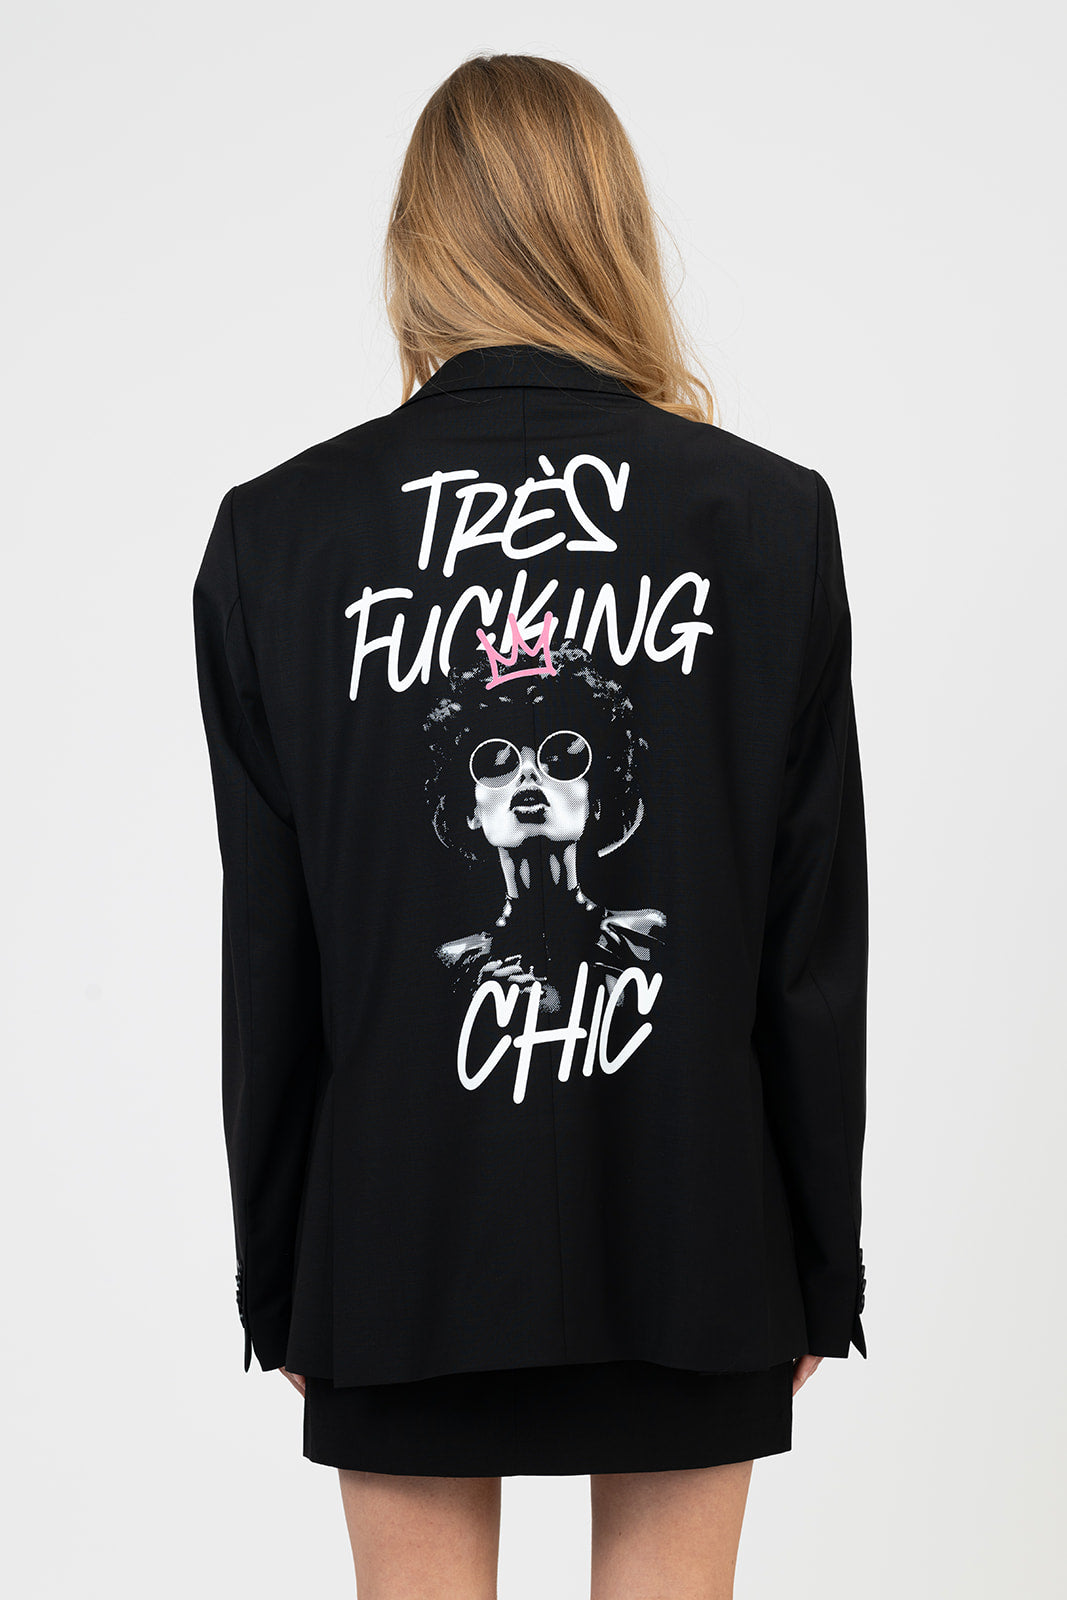 Très fucking chic - Limited Edition